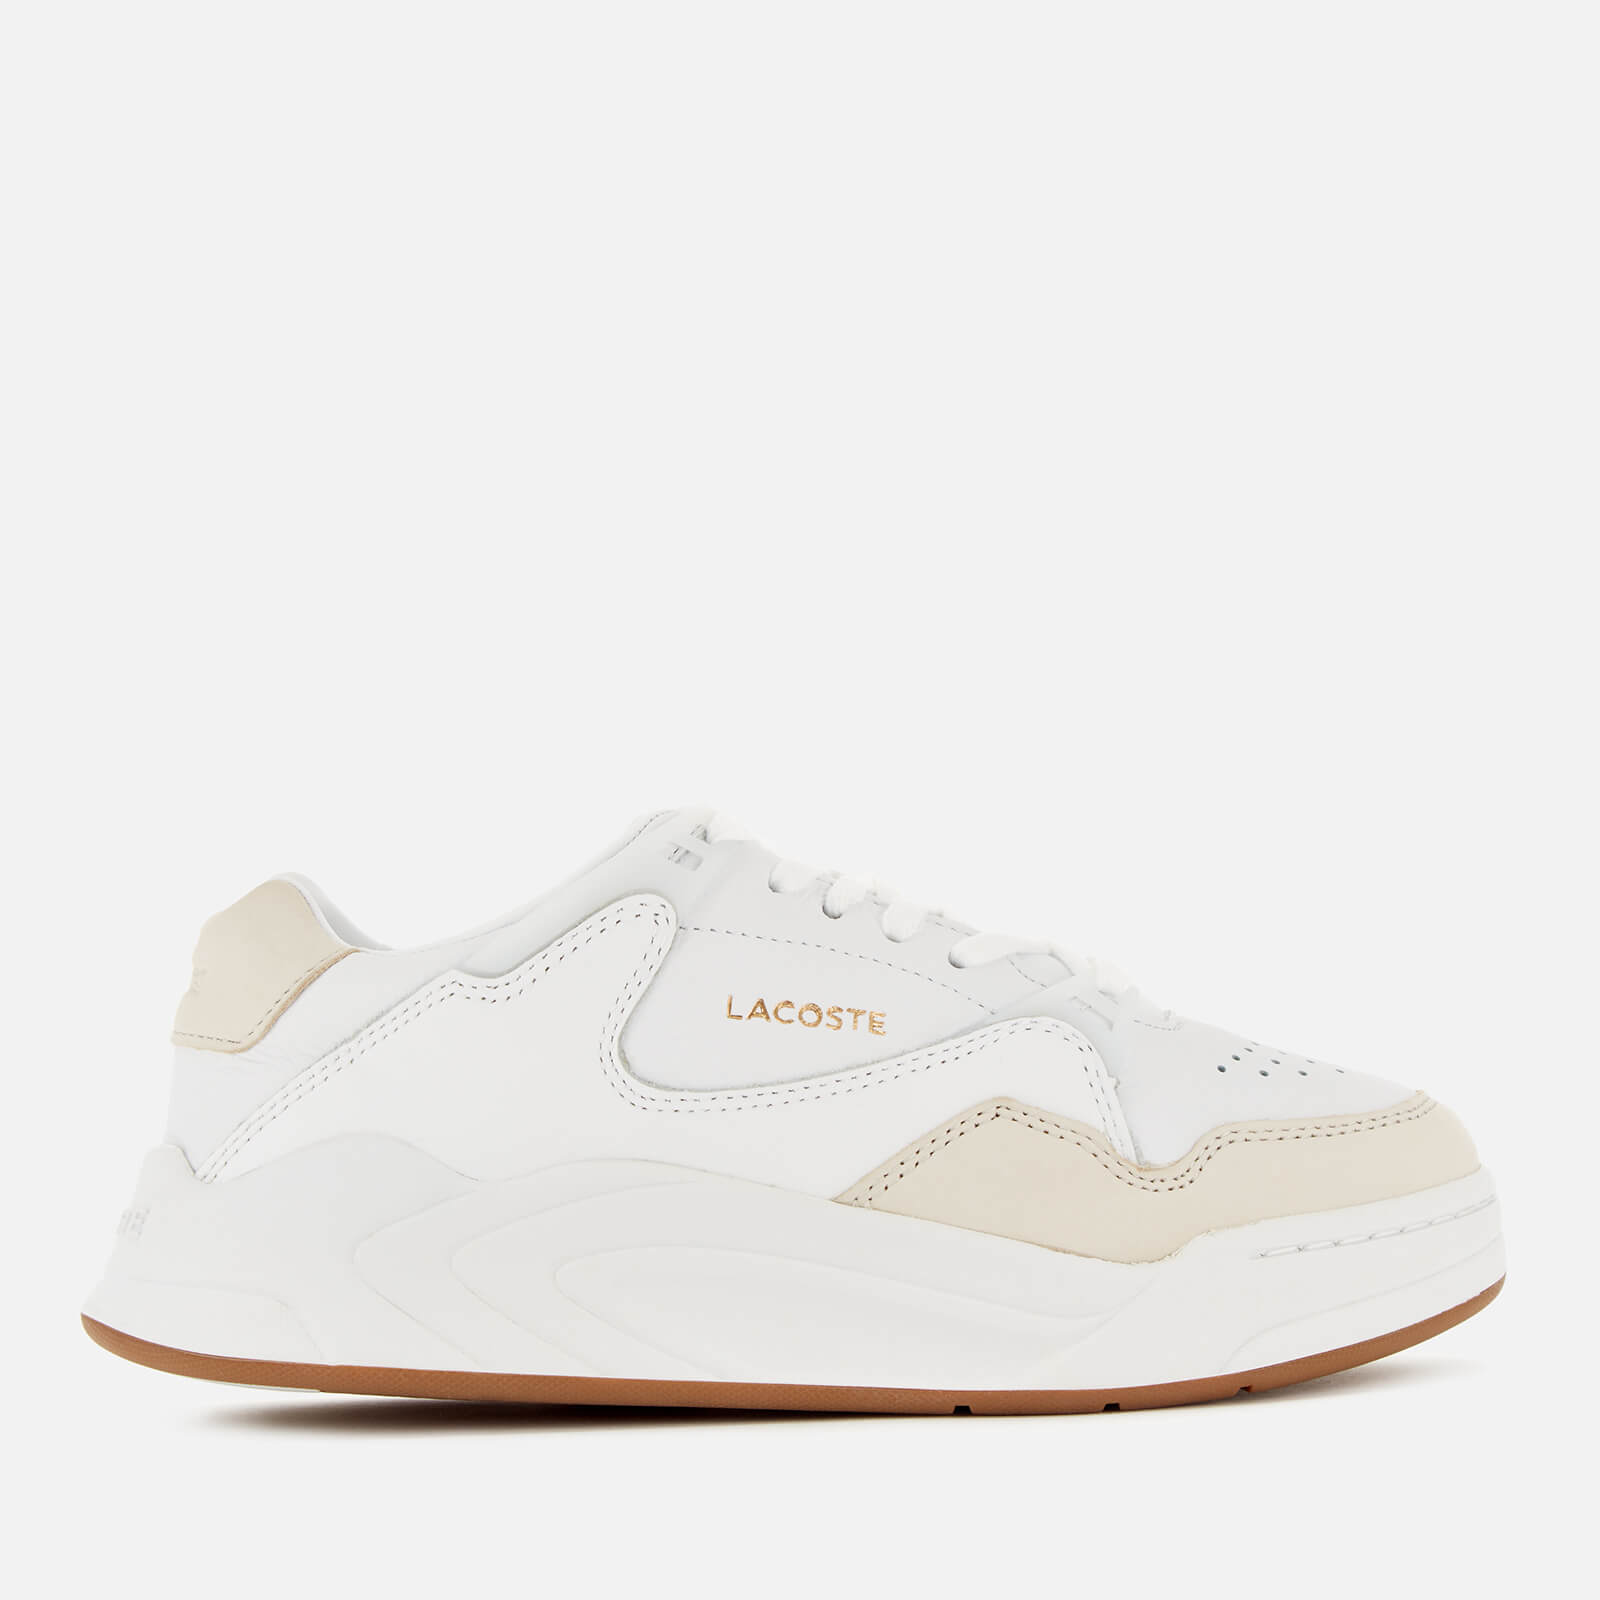 lacoste women's white leather sneakers